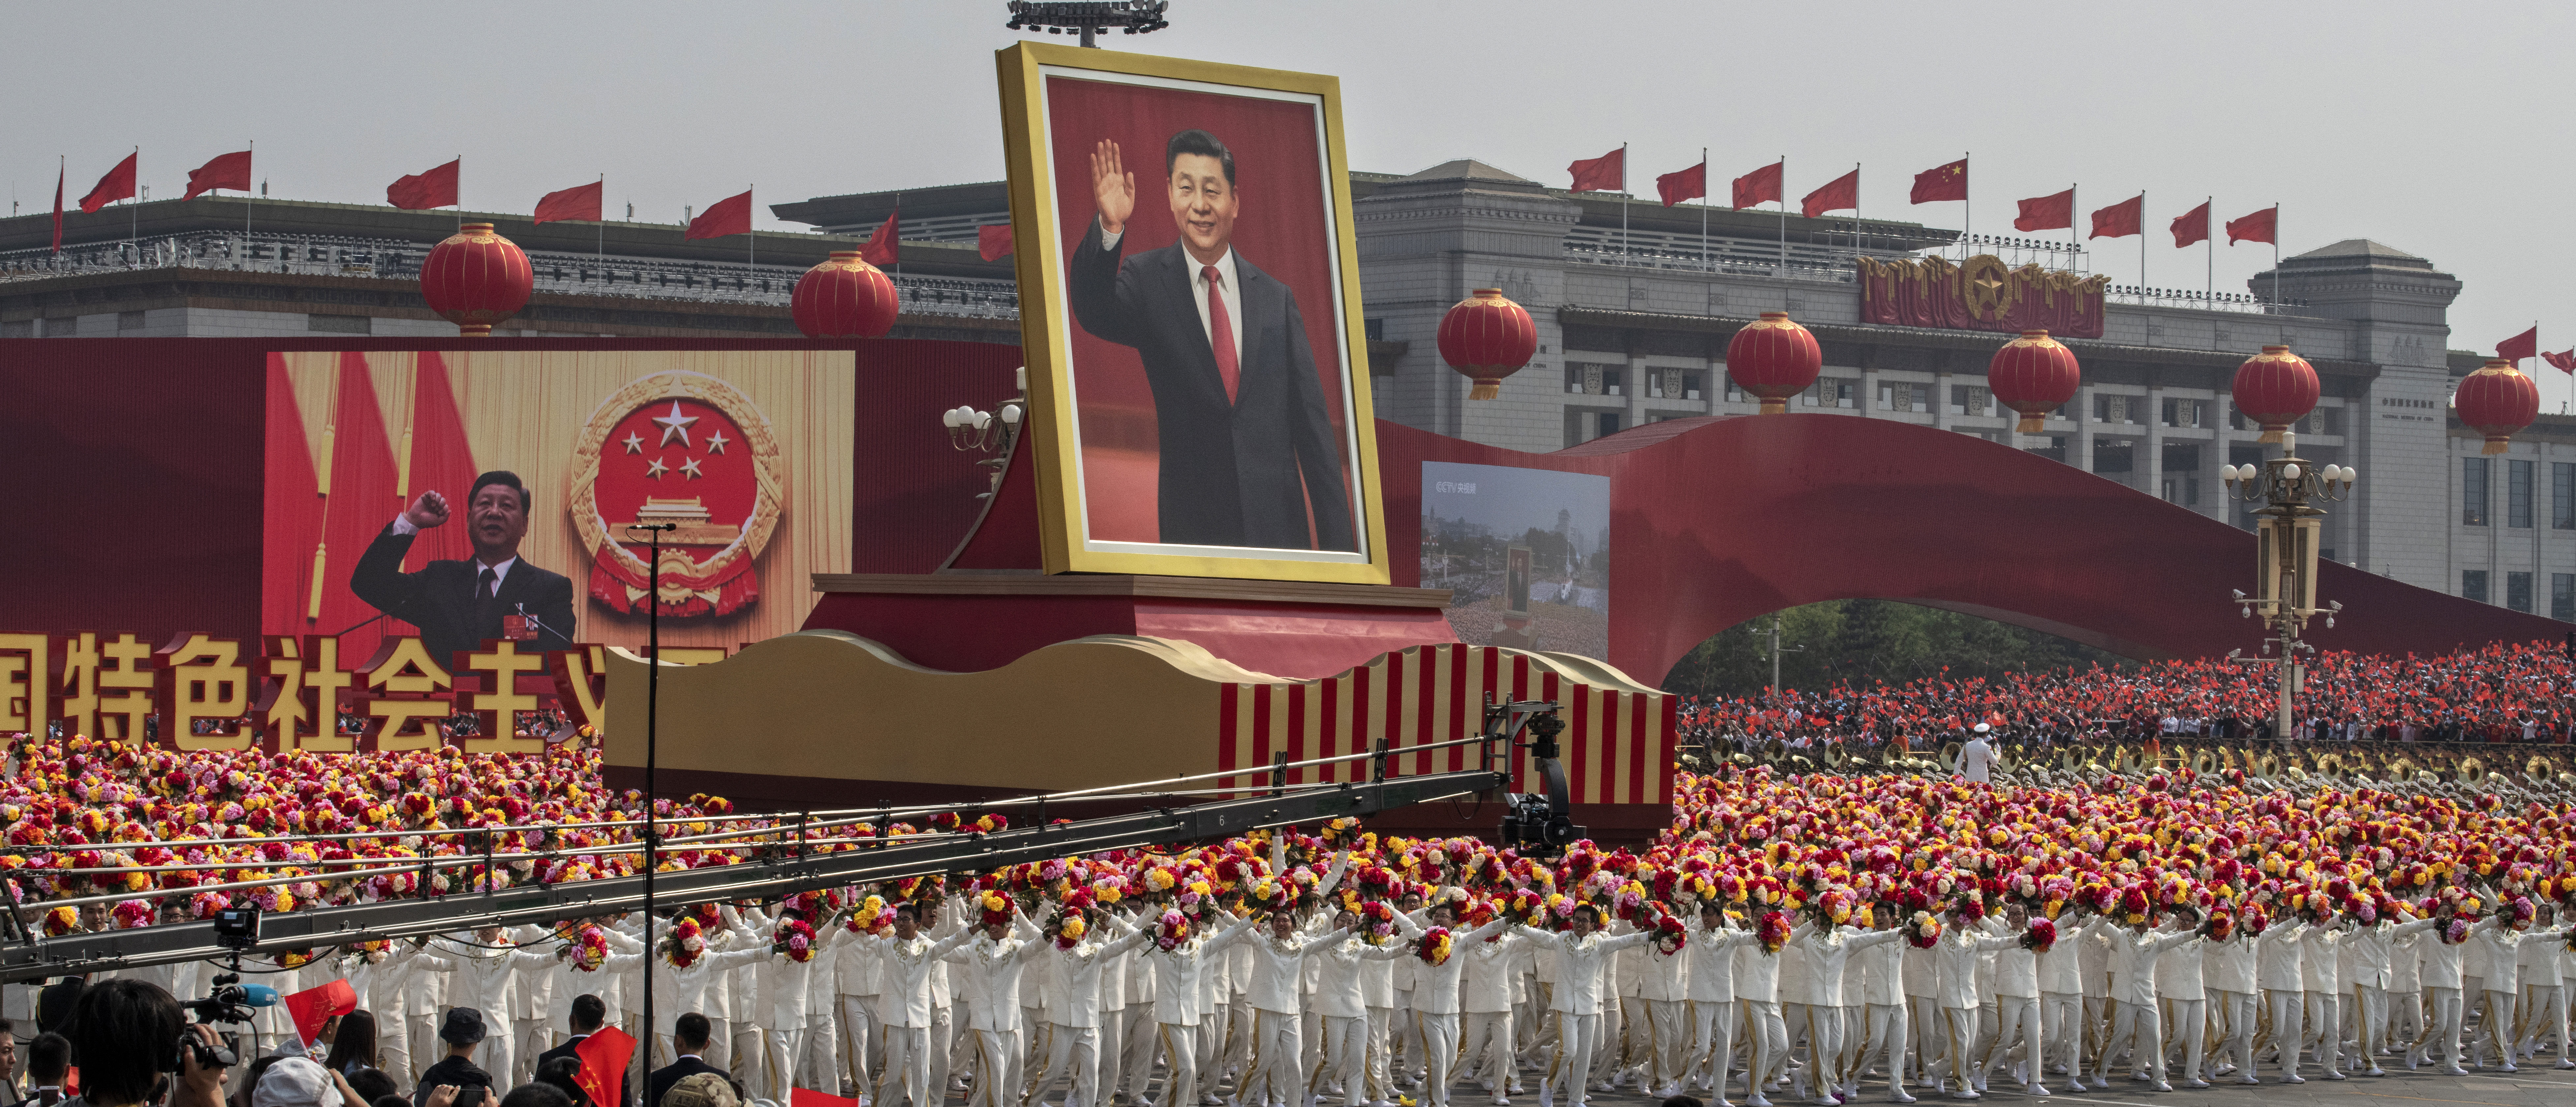 A giant portrait of General Secretary Xi Jinping is carried atop a float at a parade to celebrate the 70th Anniversary of the founding of the People's Republic of China at Tiananmen Square on October 1, 2019 in Beijing, China. (Photo by Kevin Frayer/Getty Images)